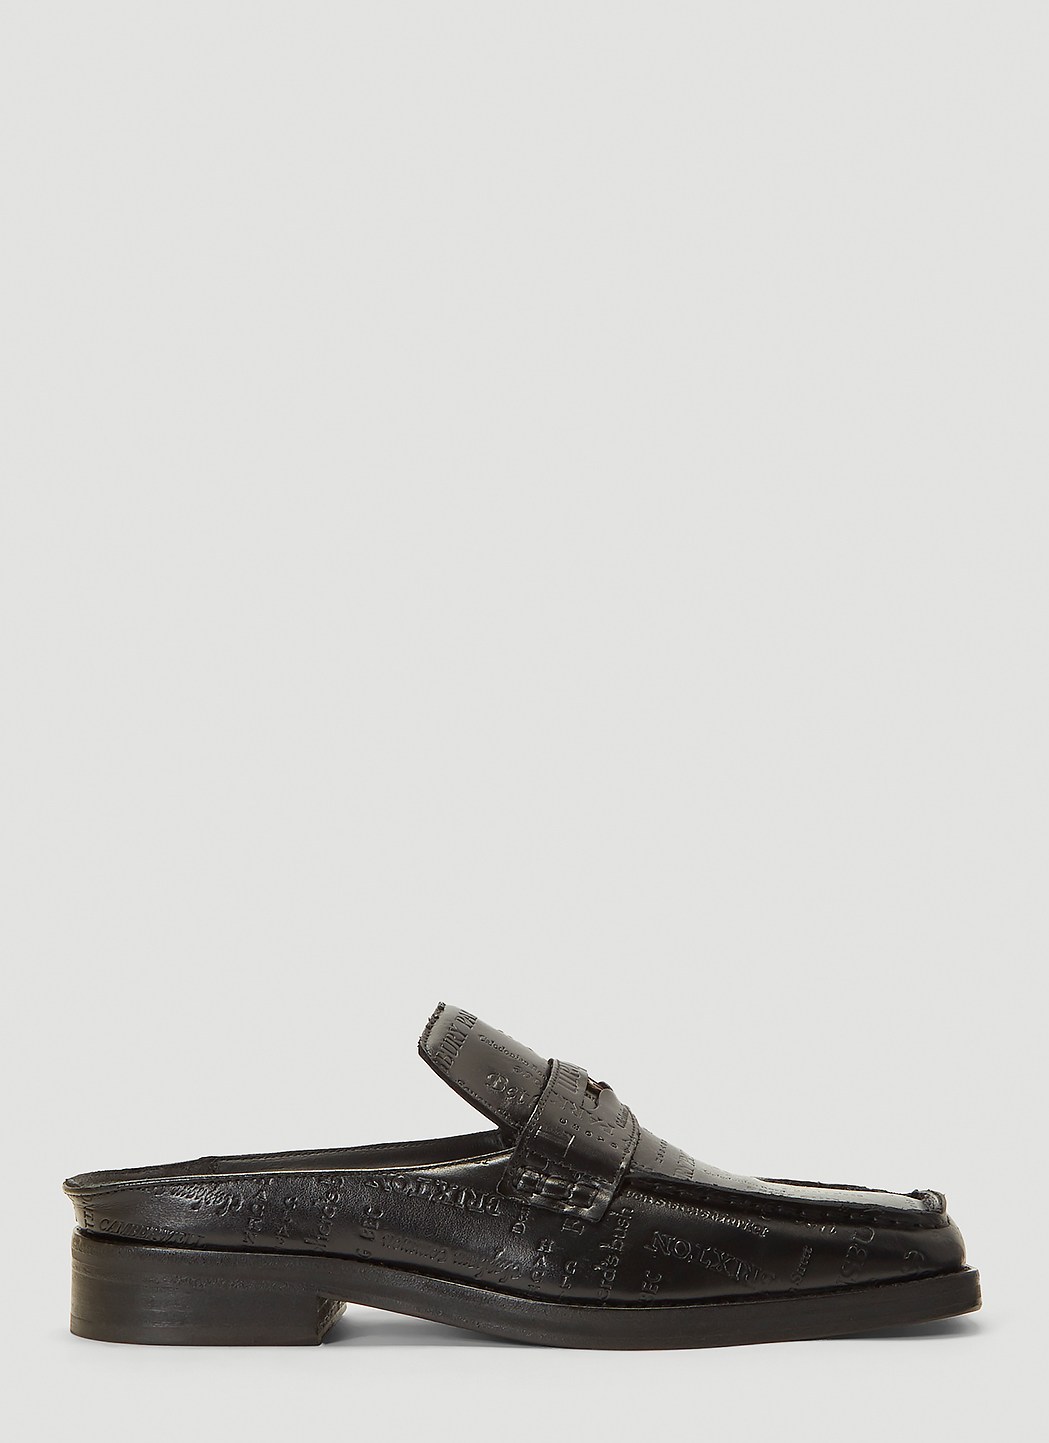 Martine Rose Arches Embossed Text Loafers | LN-CC